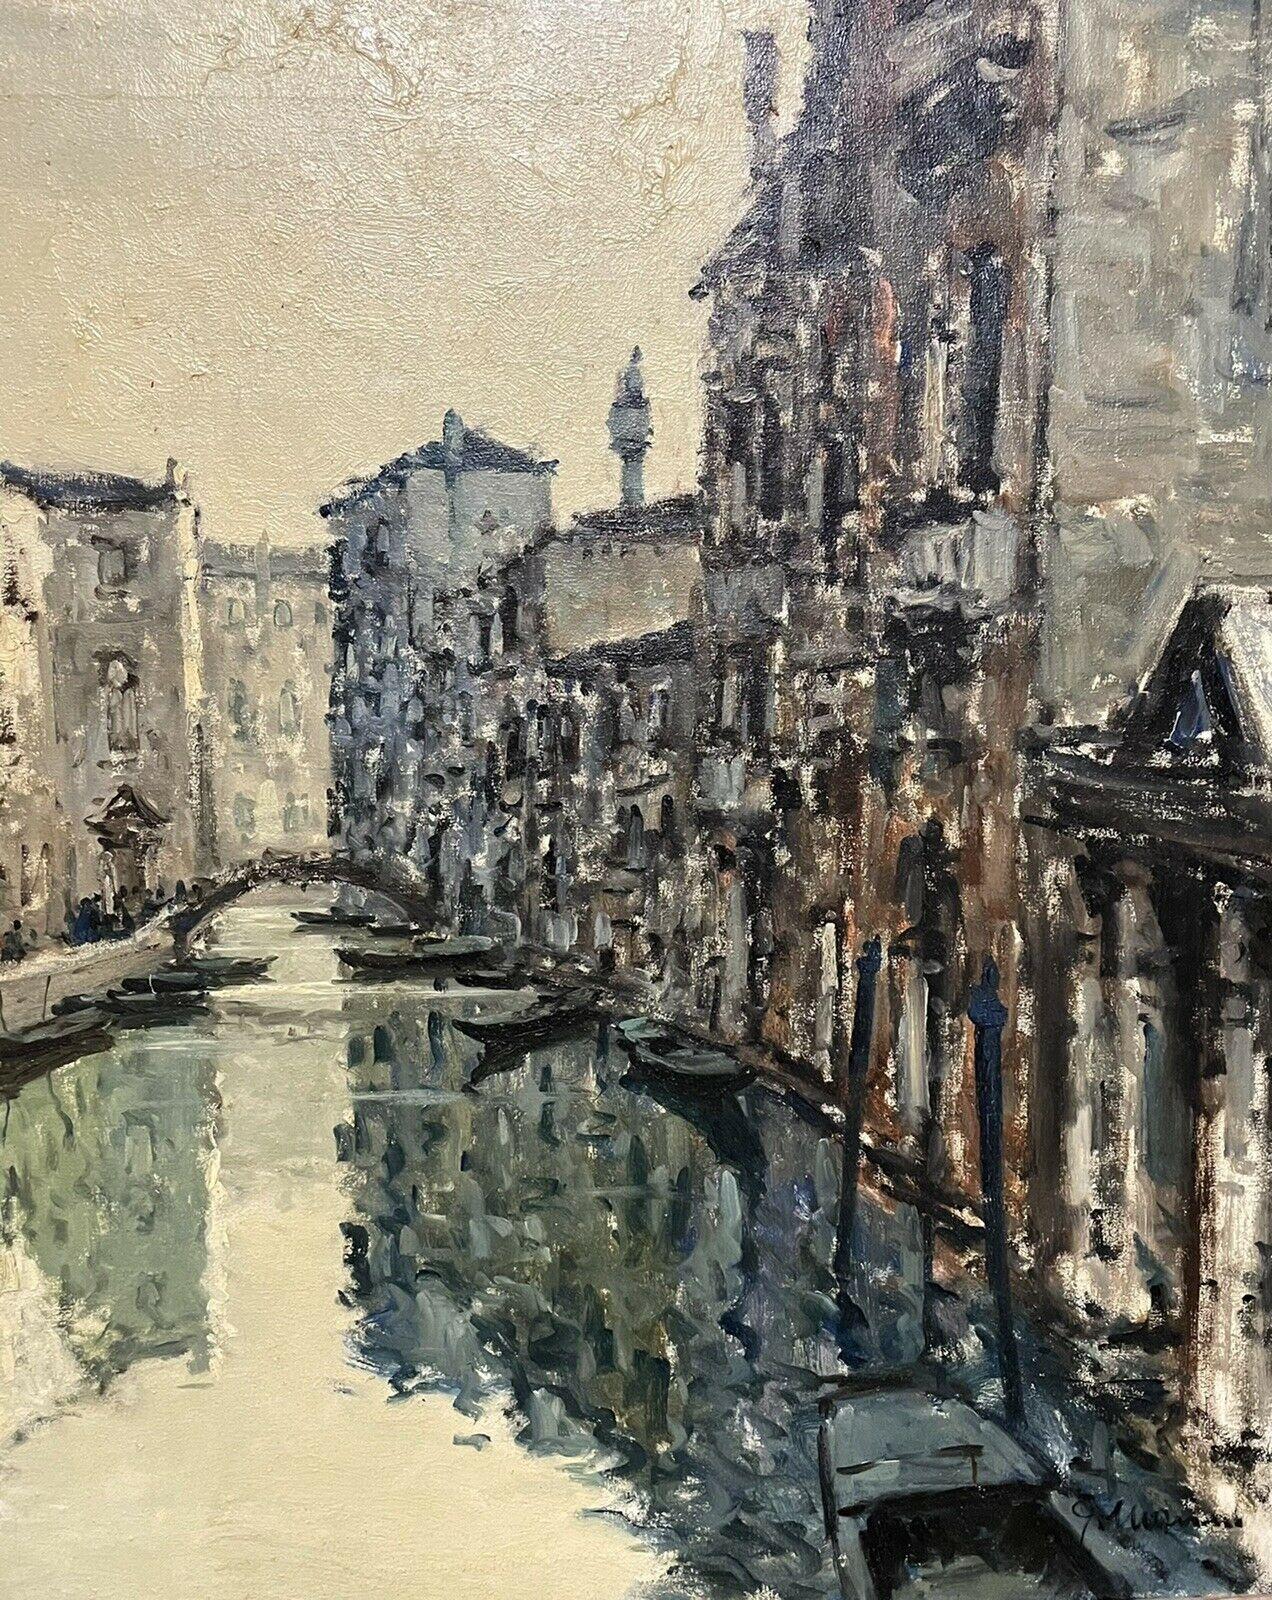 VERY LARGE 1960'S ITALIAN SIGNED OIL - IMPRESSIONIST VENICE TRANQUIL CANAL SCENE - Impressionist Painting by Italian artist